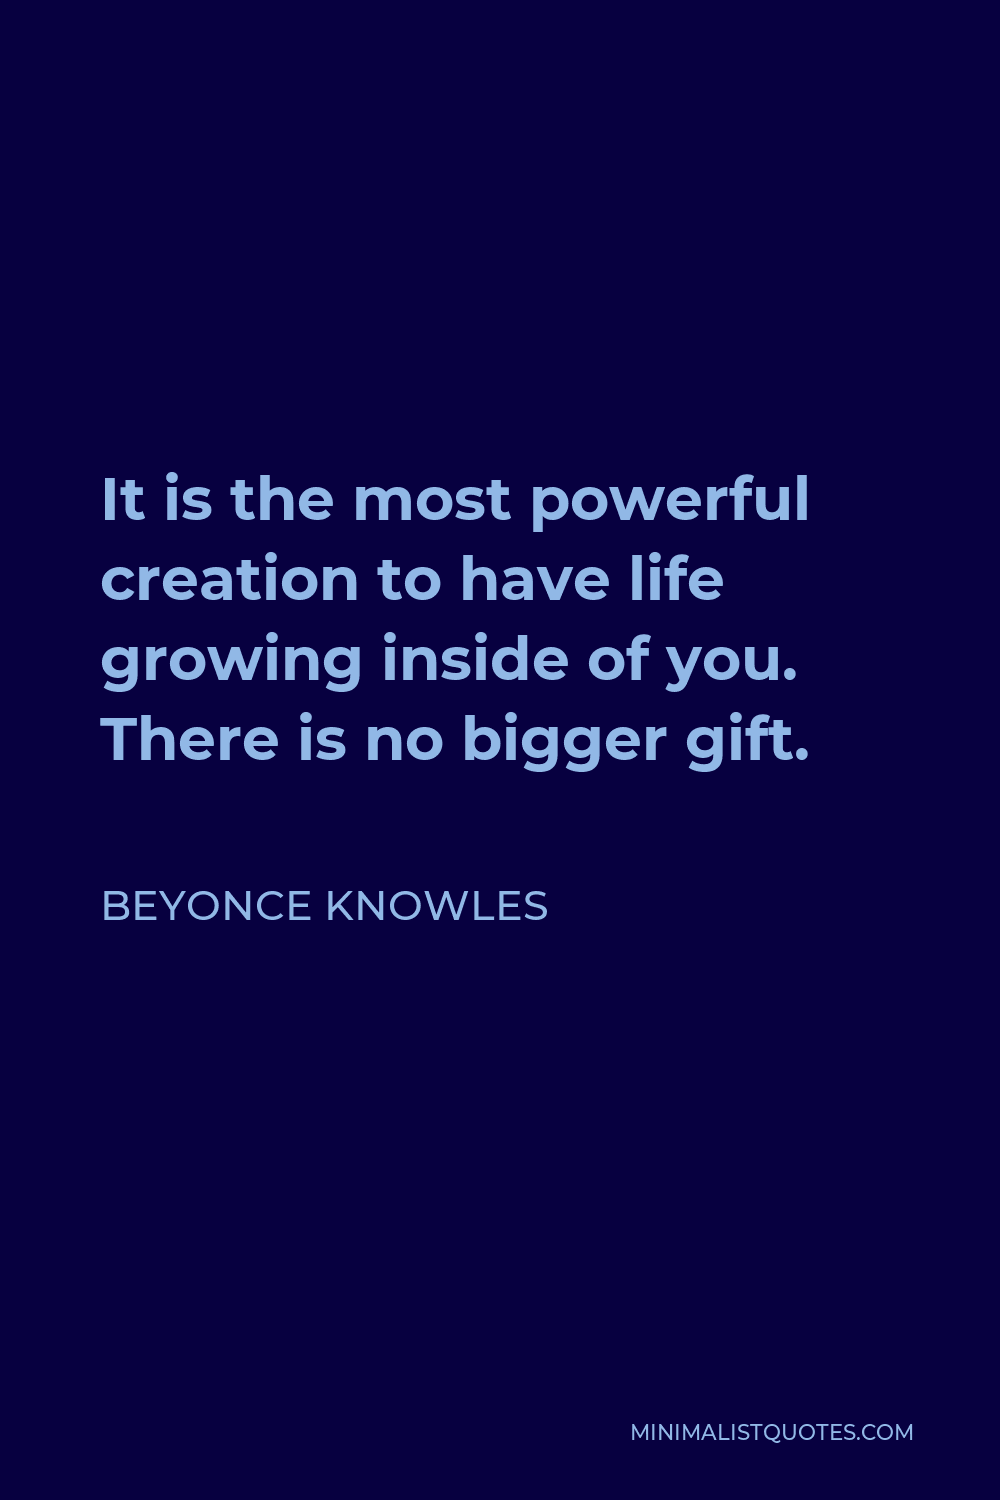 Beyonce Knowles Quote - It is the most powerful creation to have life growing inside of you. There is no bigger gift.